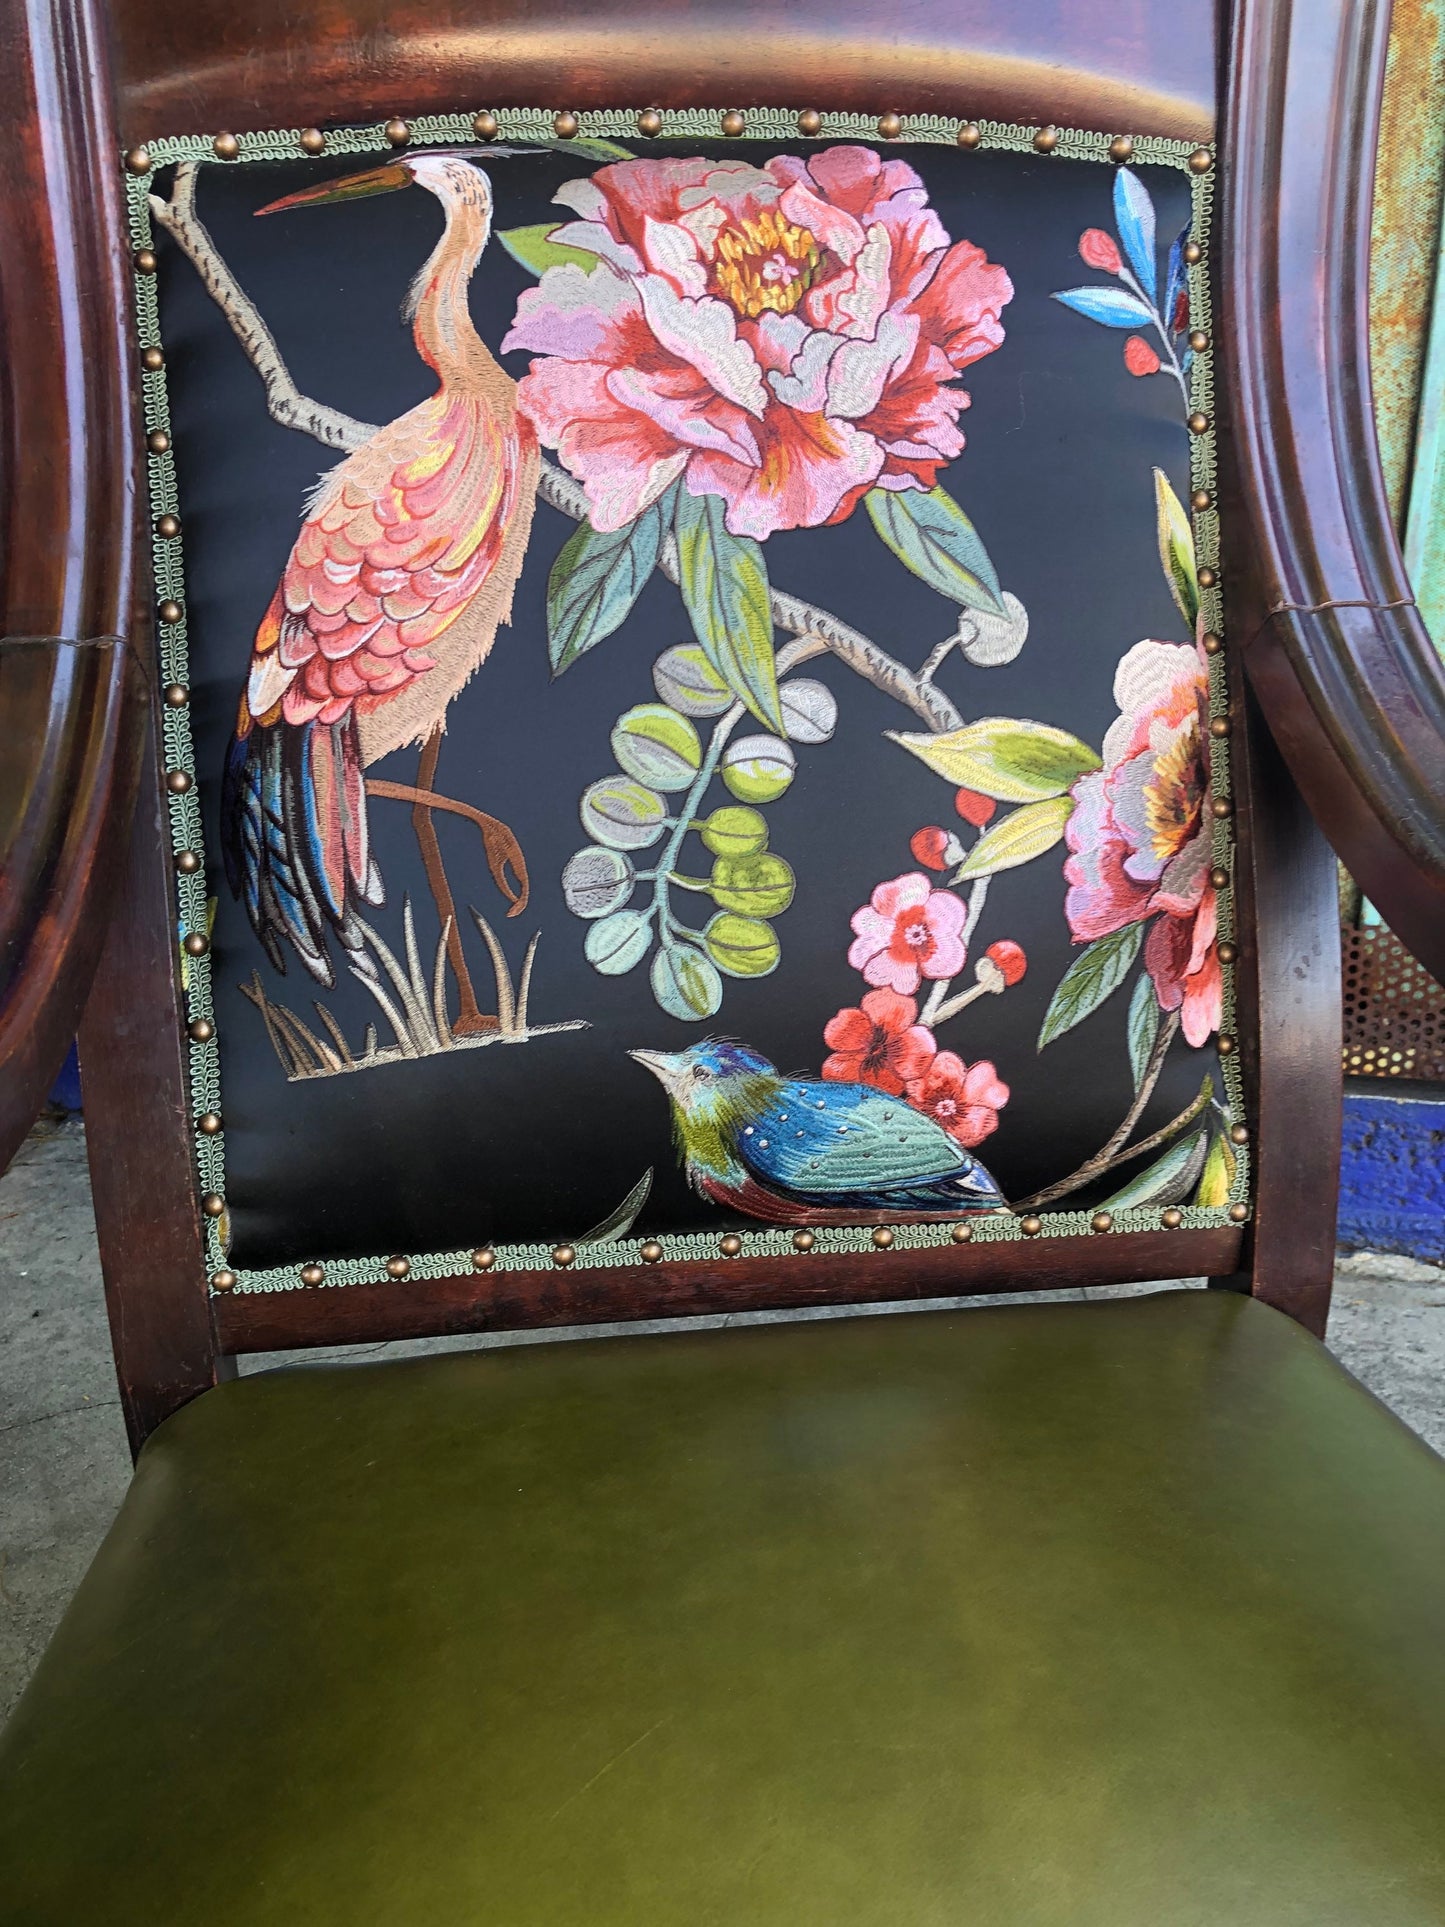 Repurposed Recycled Victorian Wooden Rocking Chair with Leather and Embroidered Textile